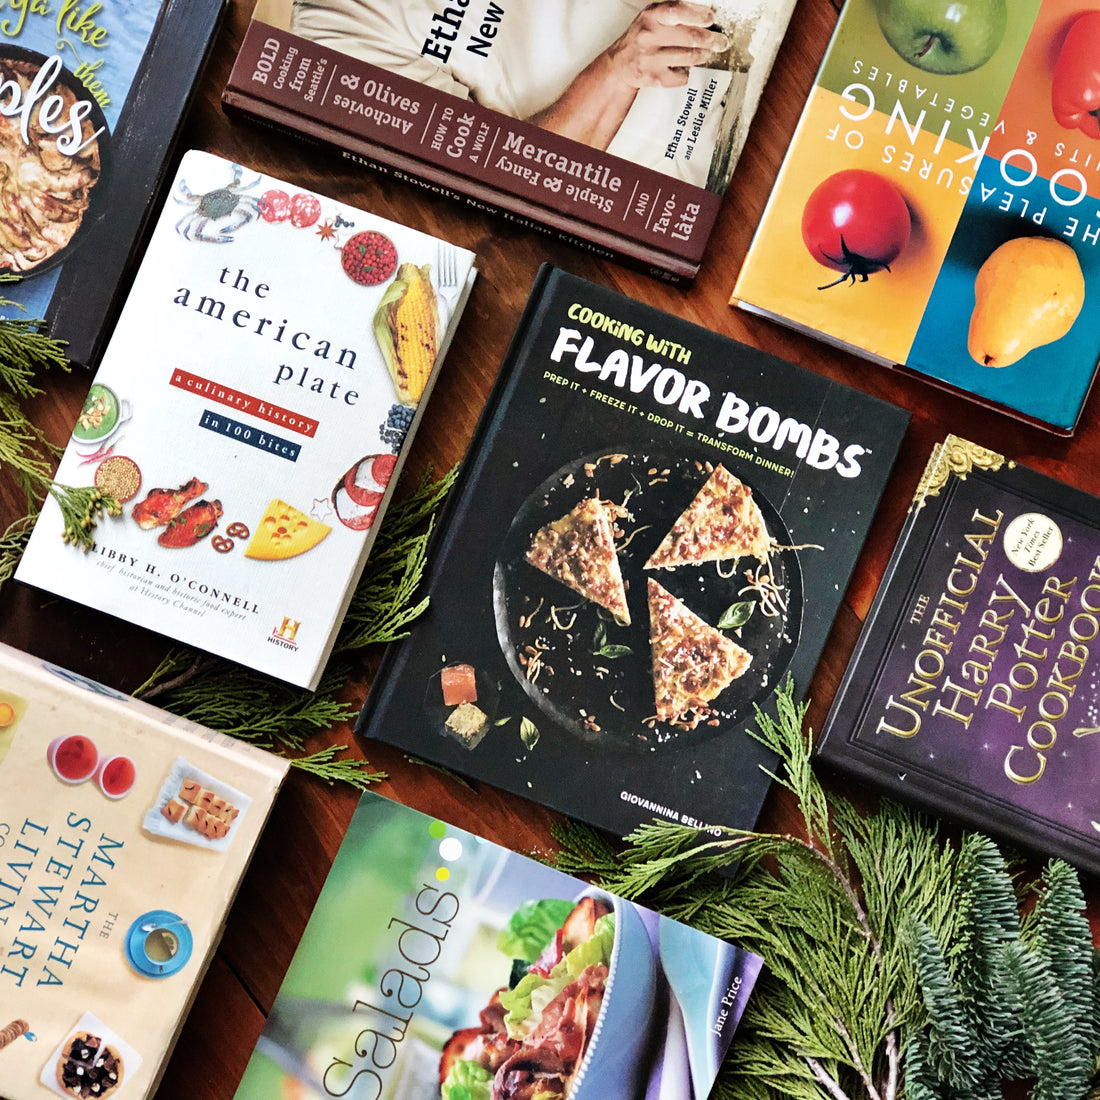 Top Shelf - Best Cookbooks and Ingredients for Your Holiday Table